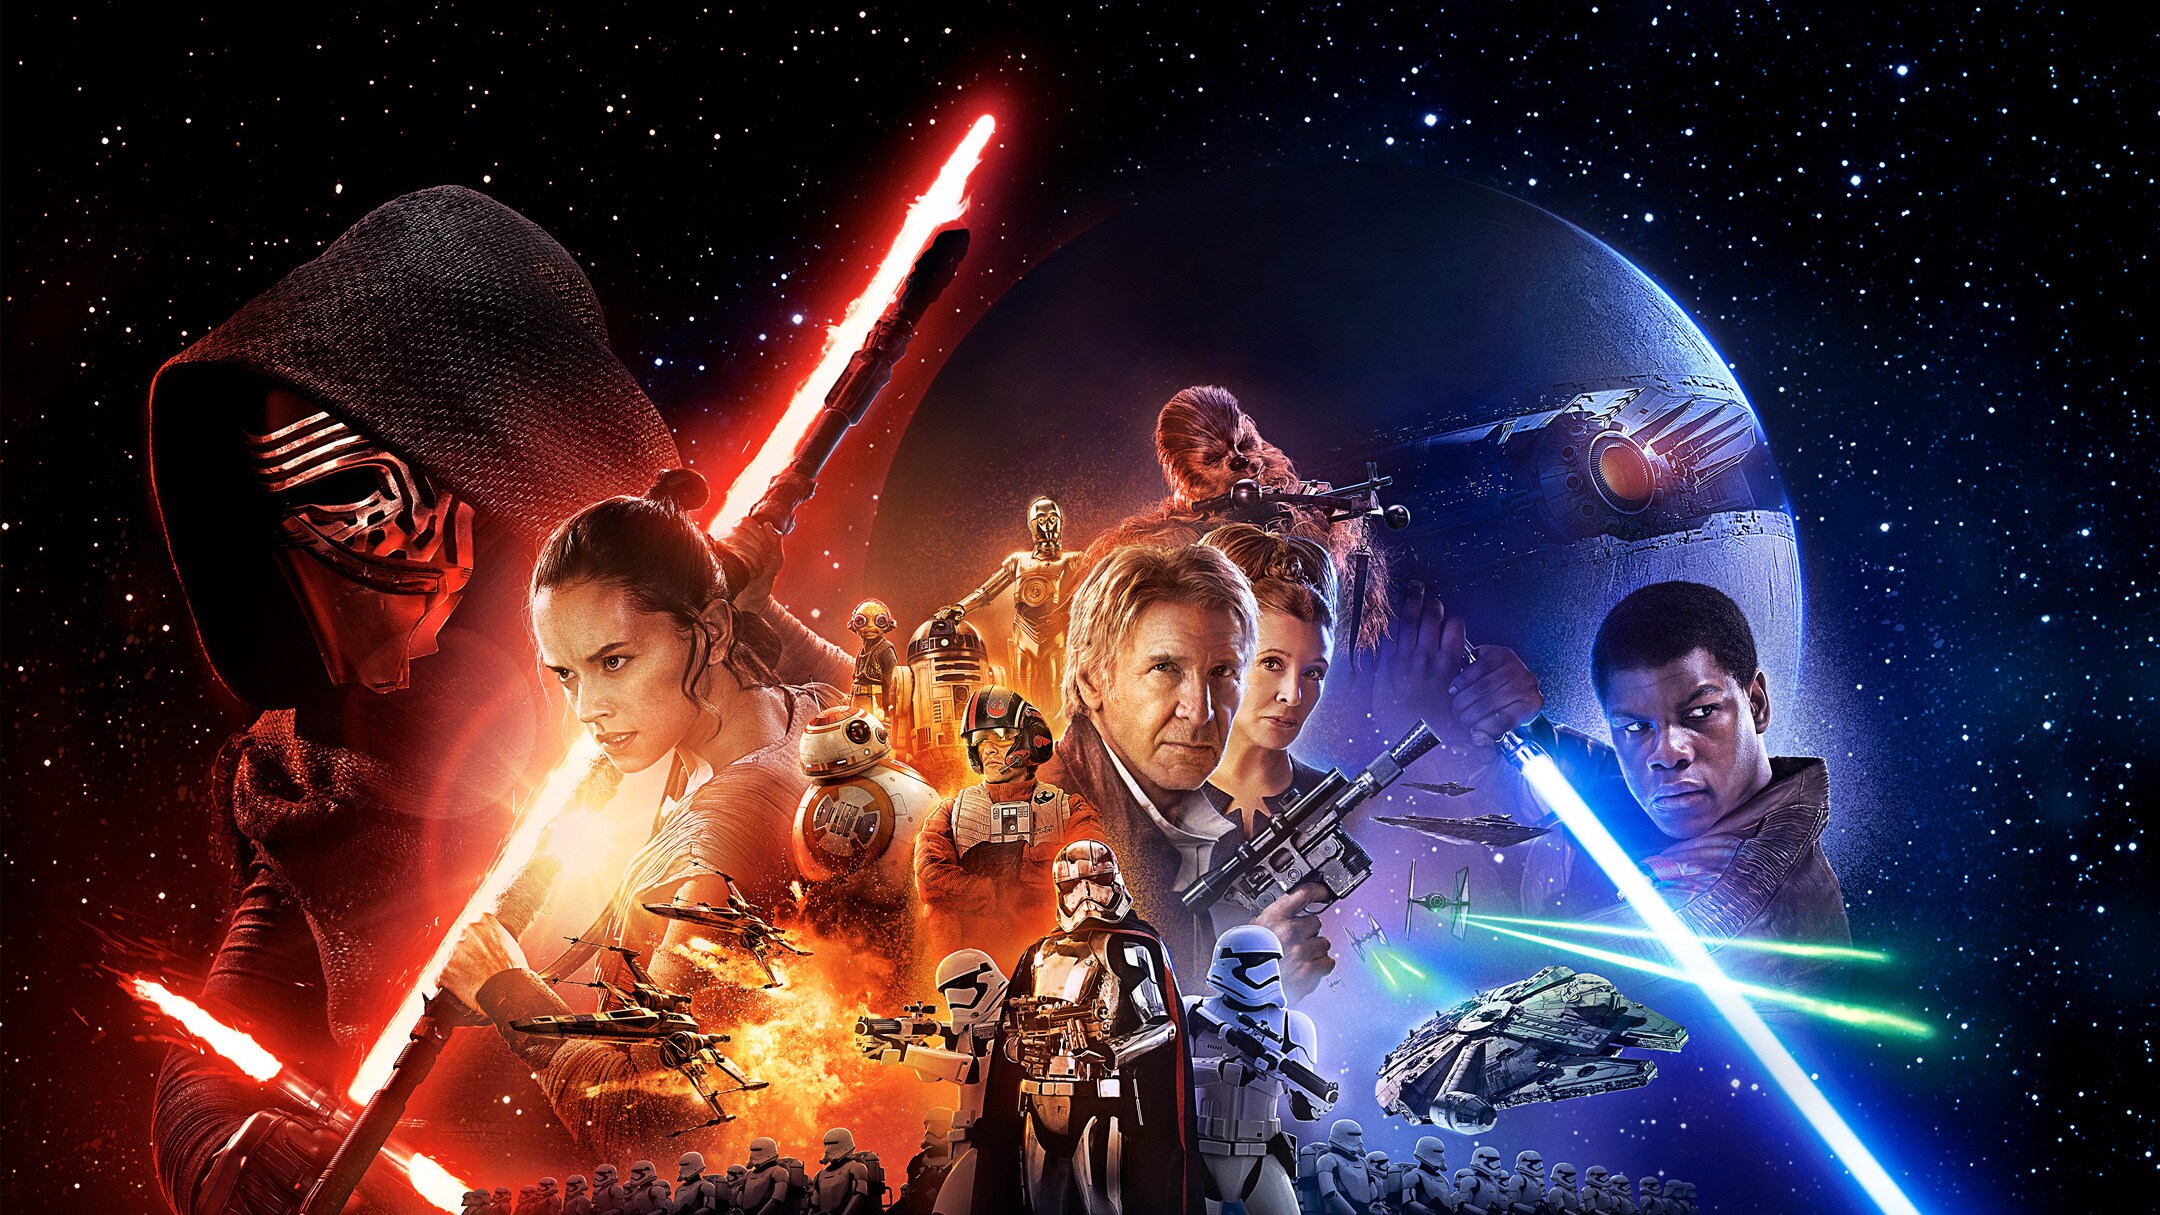 Star Wars: The Force Awakens Theatrical Poster First Look, In-theater Exclusives and More